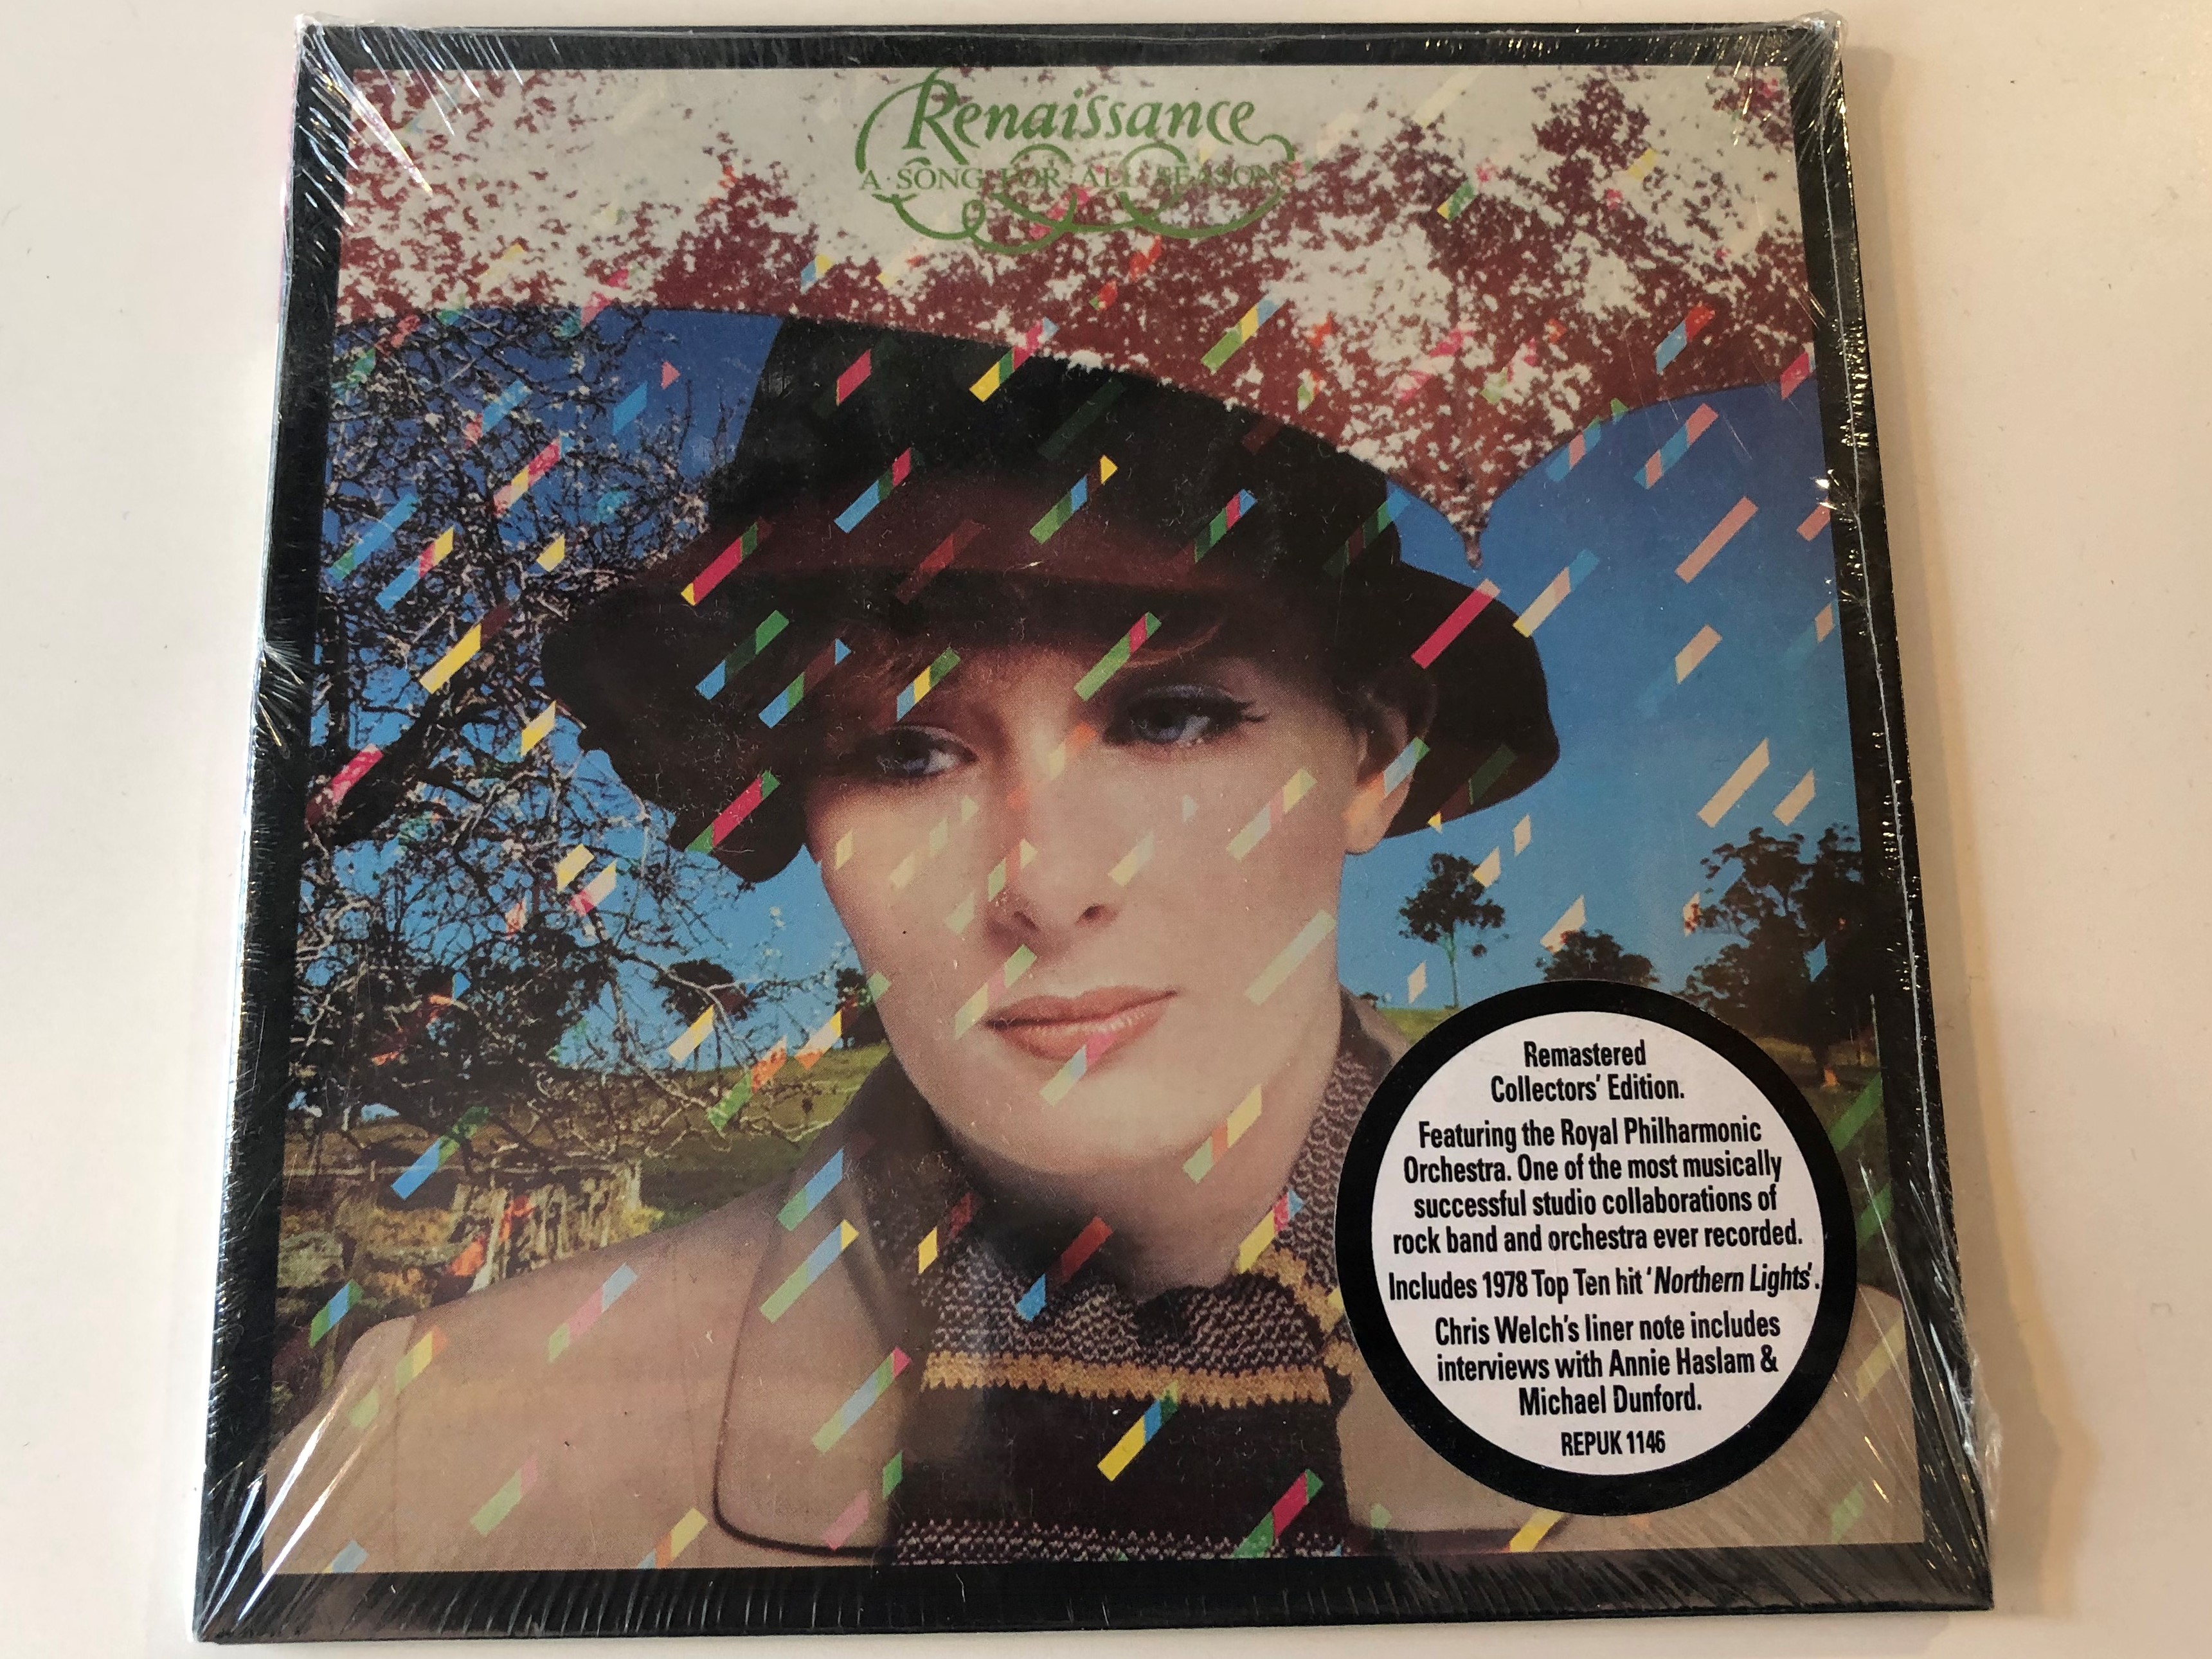 renaissance-a-song-for-all-seasons-remastered-collector-s-edition.-featuring-the-royal-philharmonic-orchestra.-includes-1978-top-ten-hit-northern-lights-.-repertoire-records-audio-cd-2011-1-.jpg